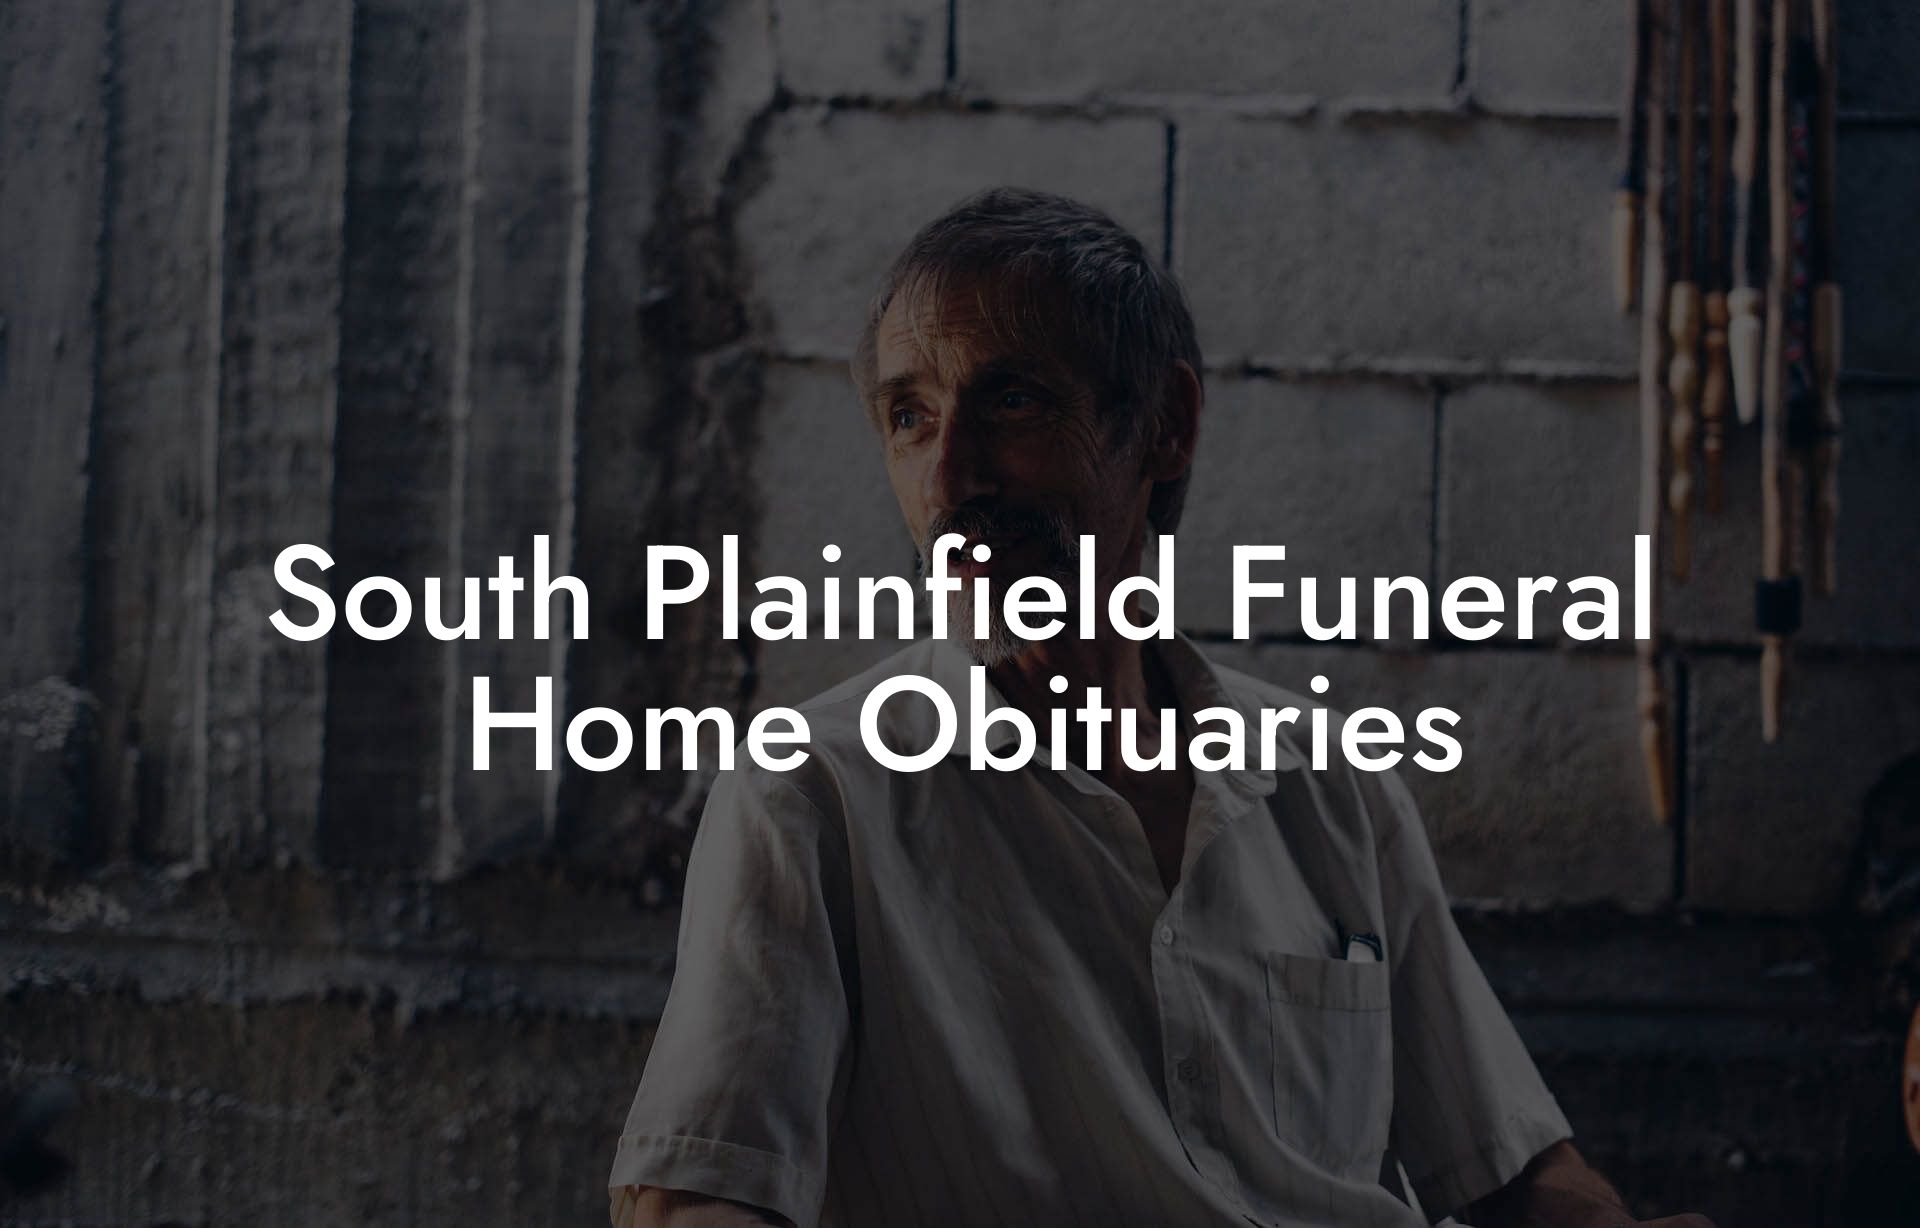 South Plainfield Funeral Home Obituaries